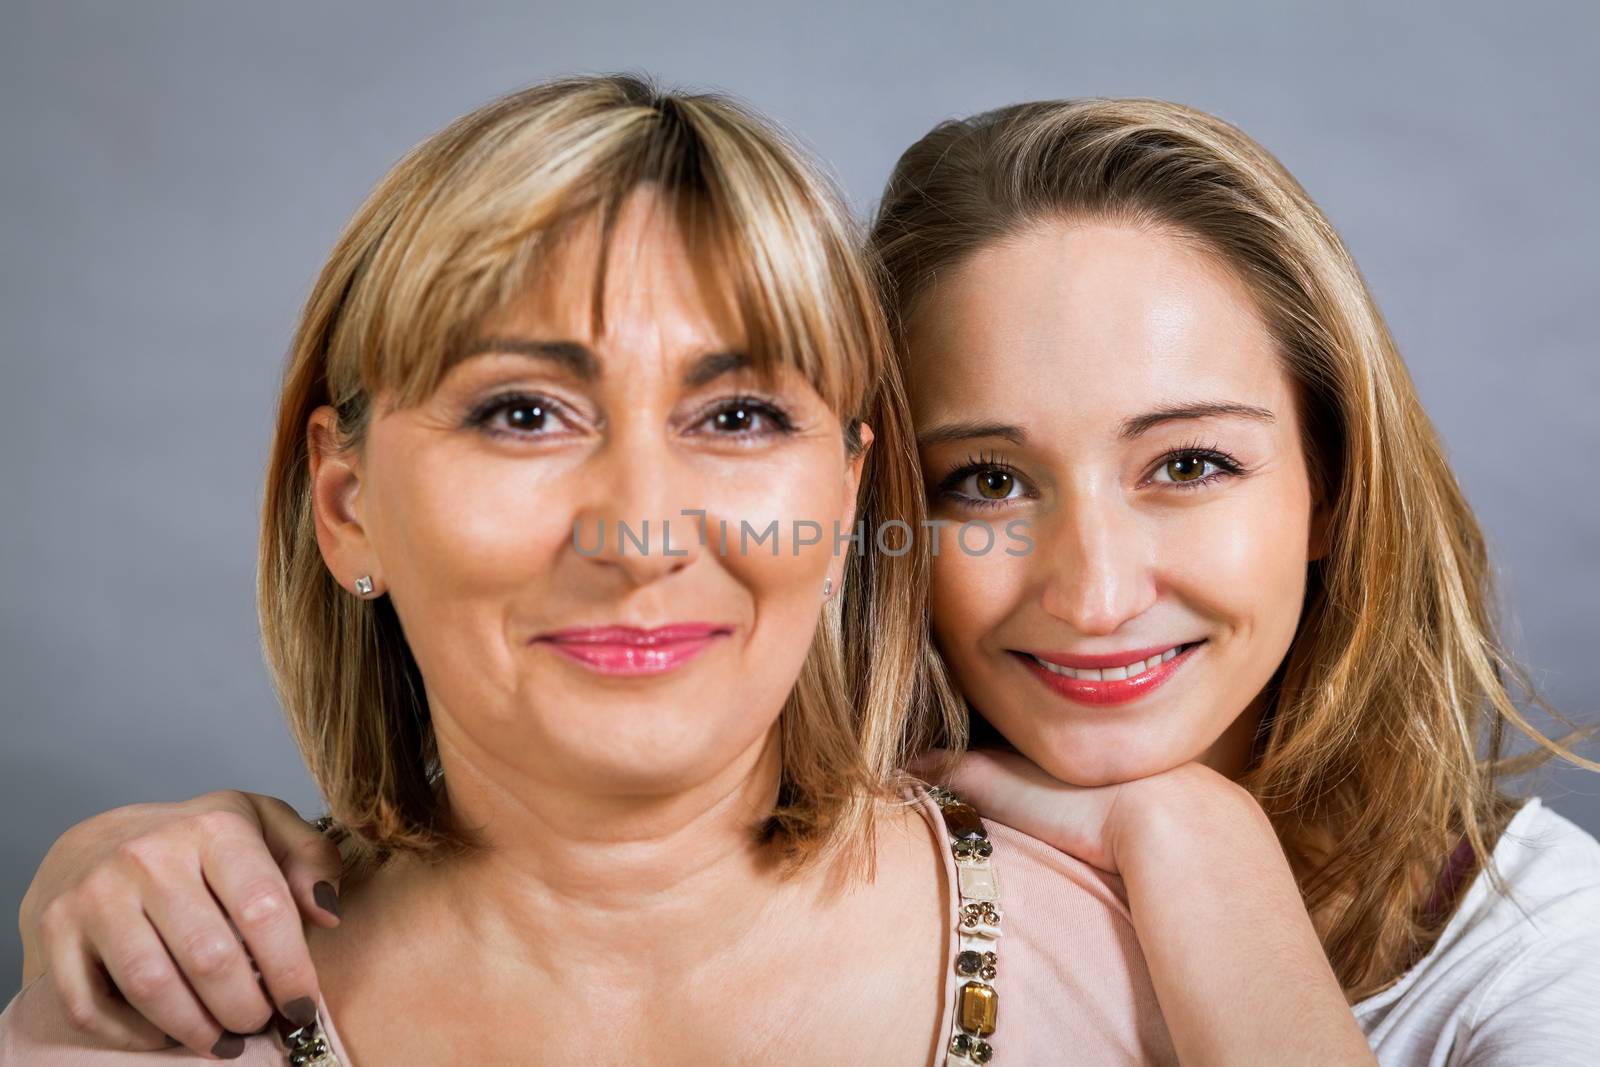 Playful beautiful young mother and her teenage daughter posing together with the young girl peeking out to the side with a happy grin, isolated on a grey studio background